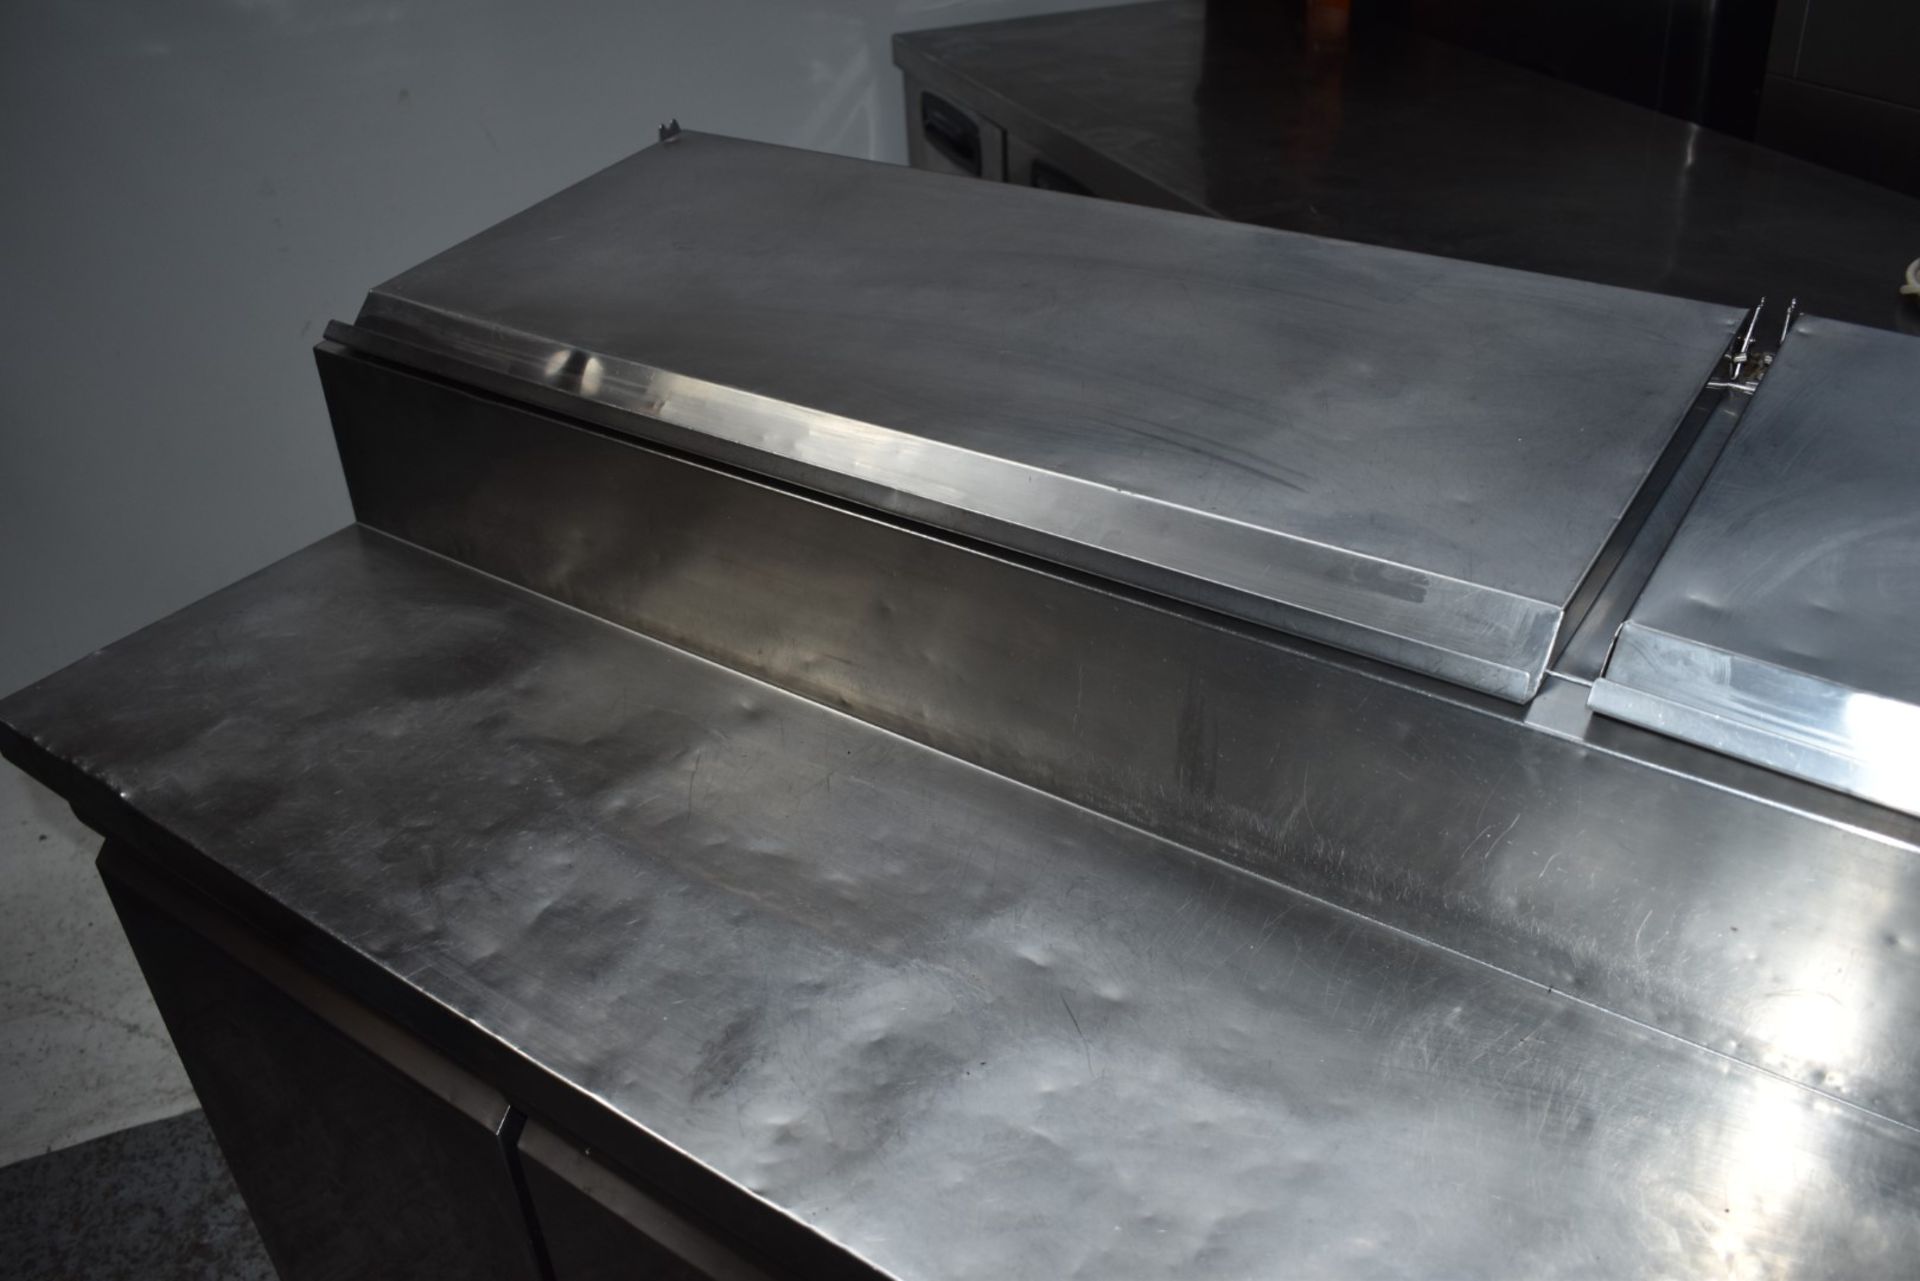 1 x Artikcold SH3000/700 3 Door Refrigerated Pizza Prep Counter - Stainless Steel Finish With Castor - Image 2 of 11